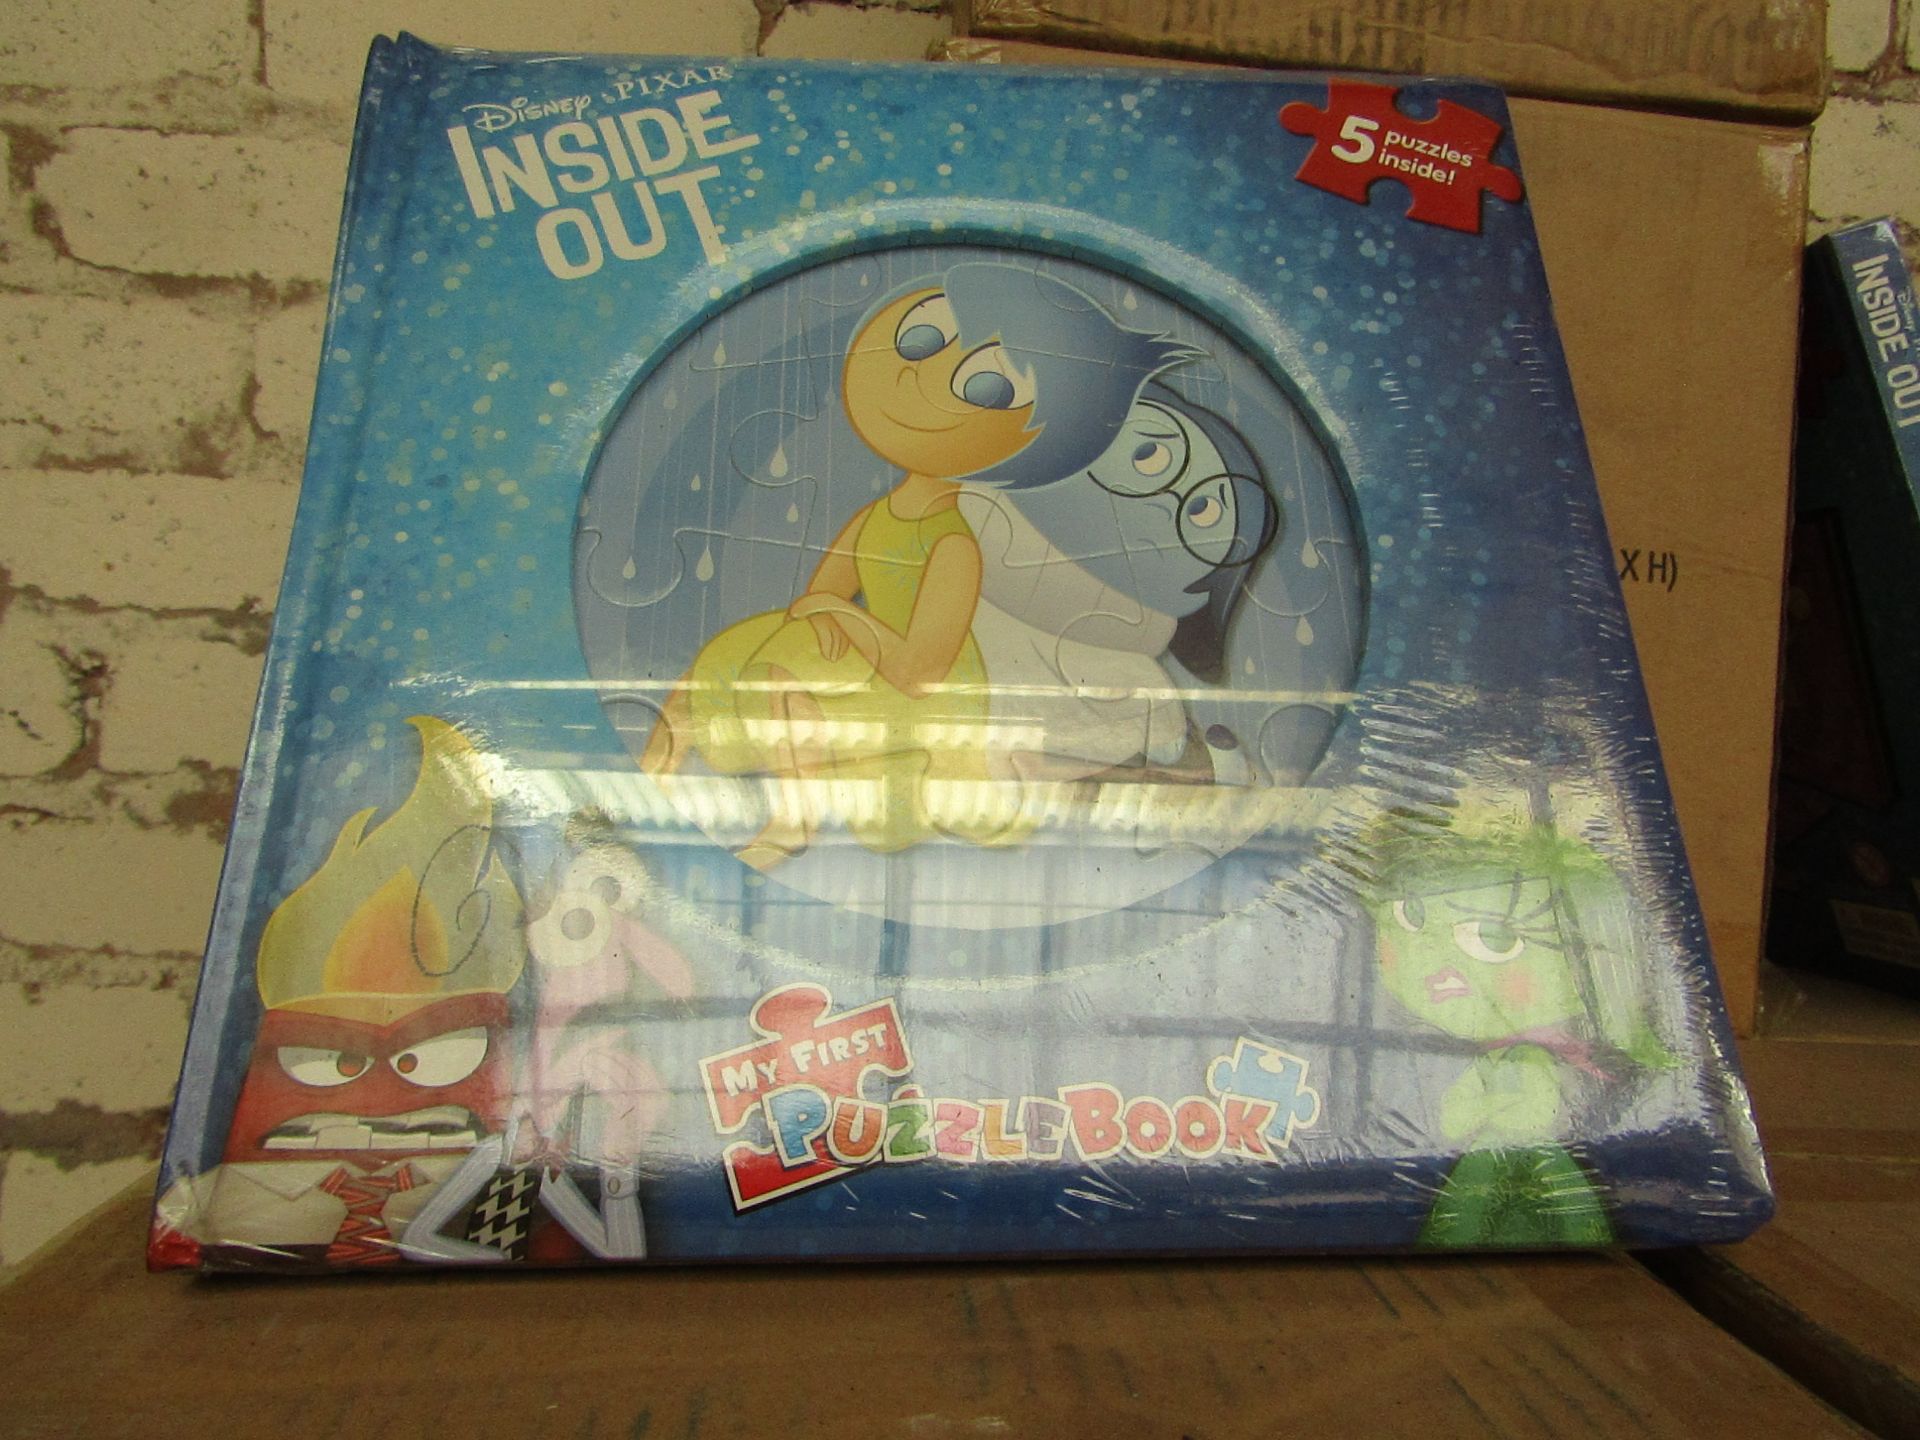 2x Disney Pixar Inside Out book containing 5 puzzles, new and packaged.